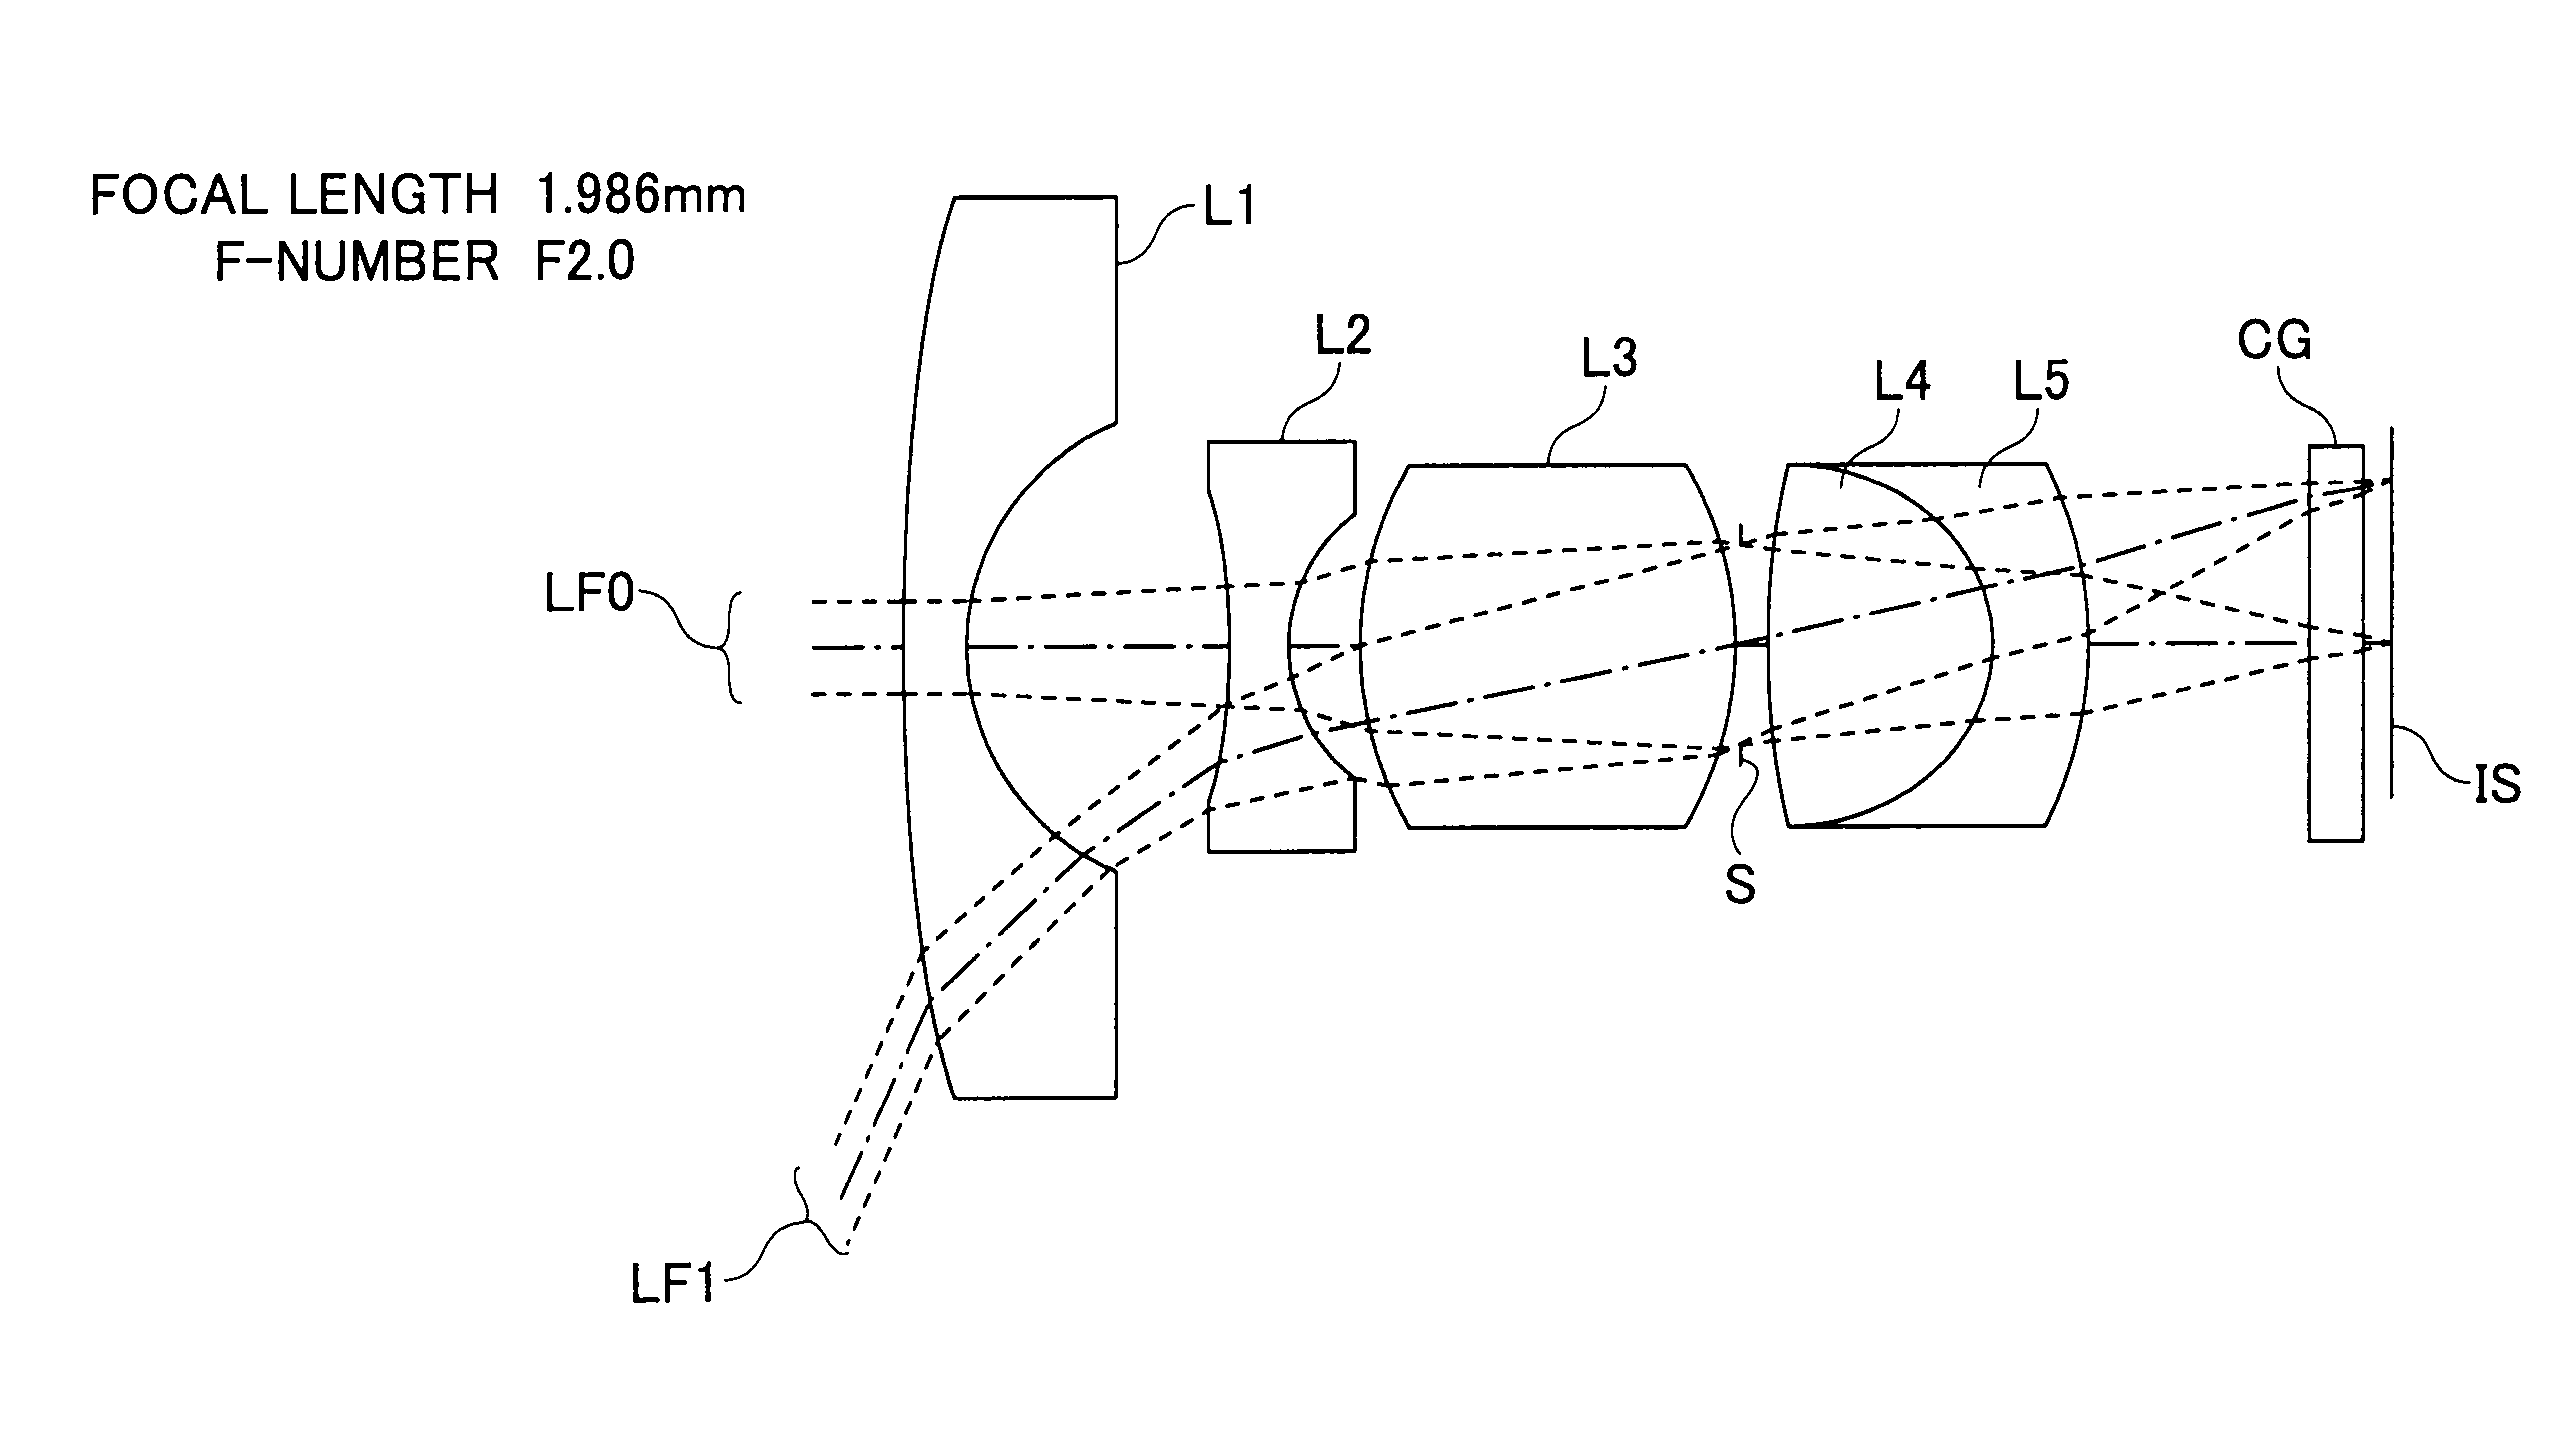 Wide-angle lens and image pickup apparatus